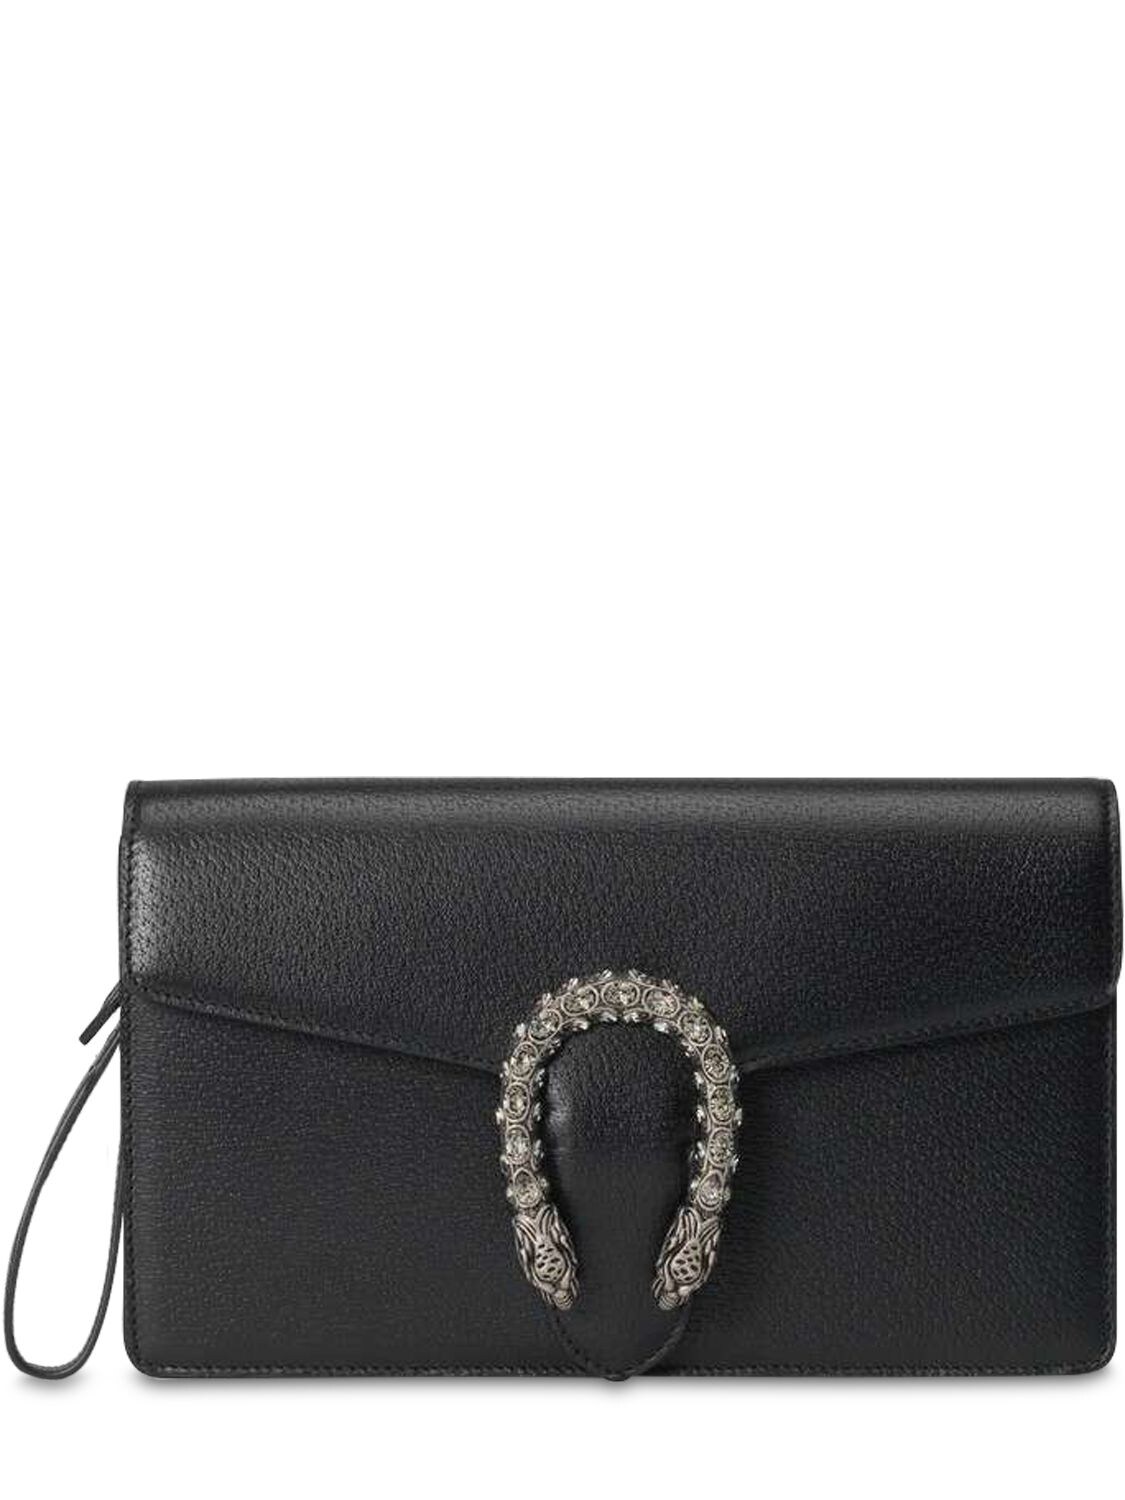 GUCCI DIONYSUS CRYSTAL BUCKLE LEATHER CLUTCH,71IH0I015-ODE3NG2